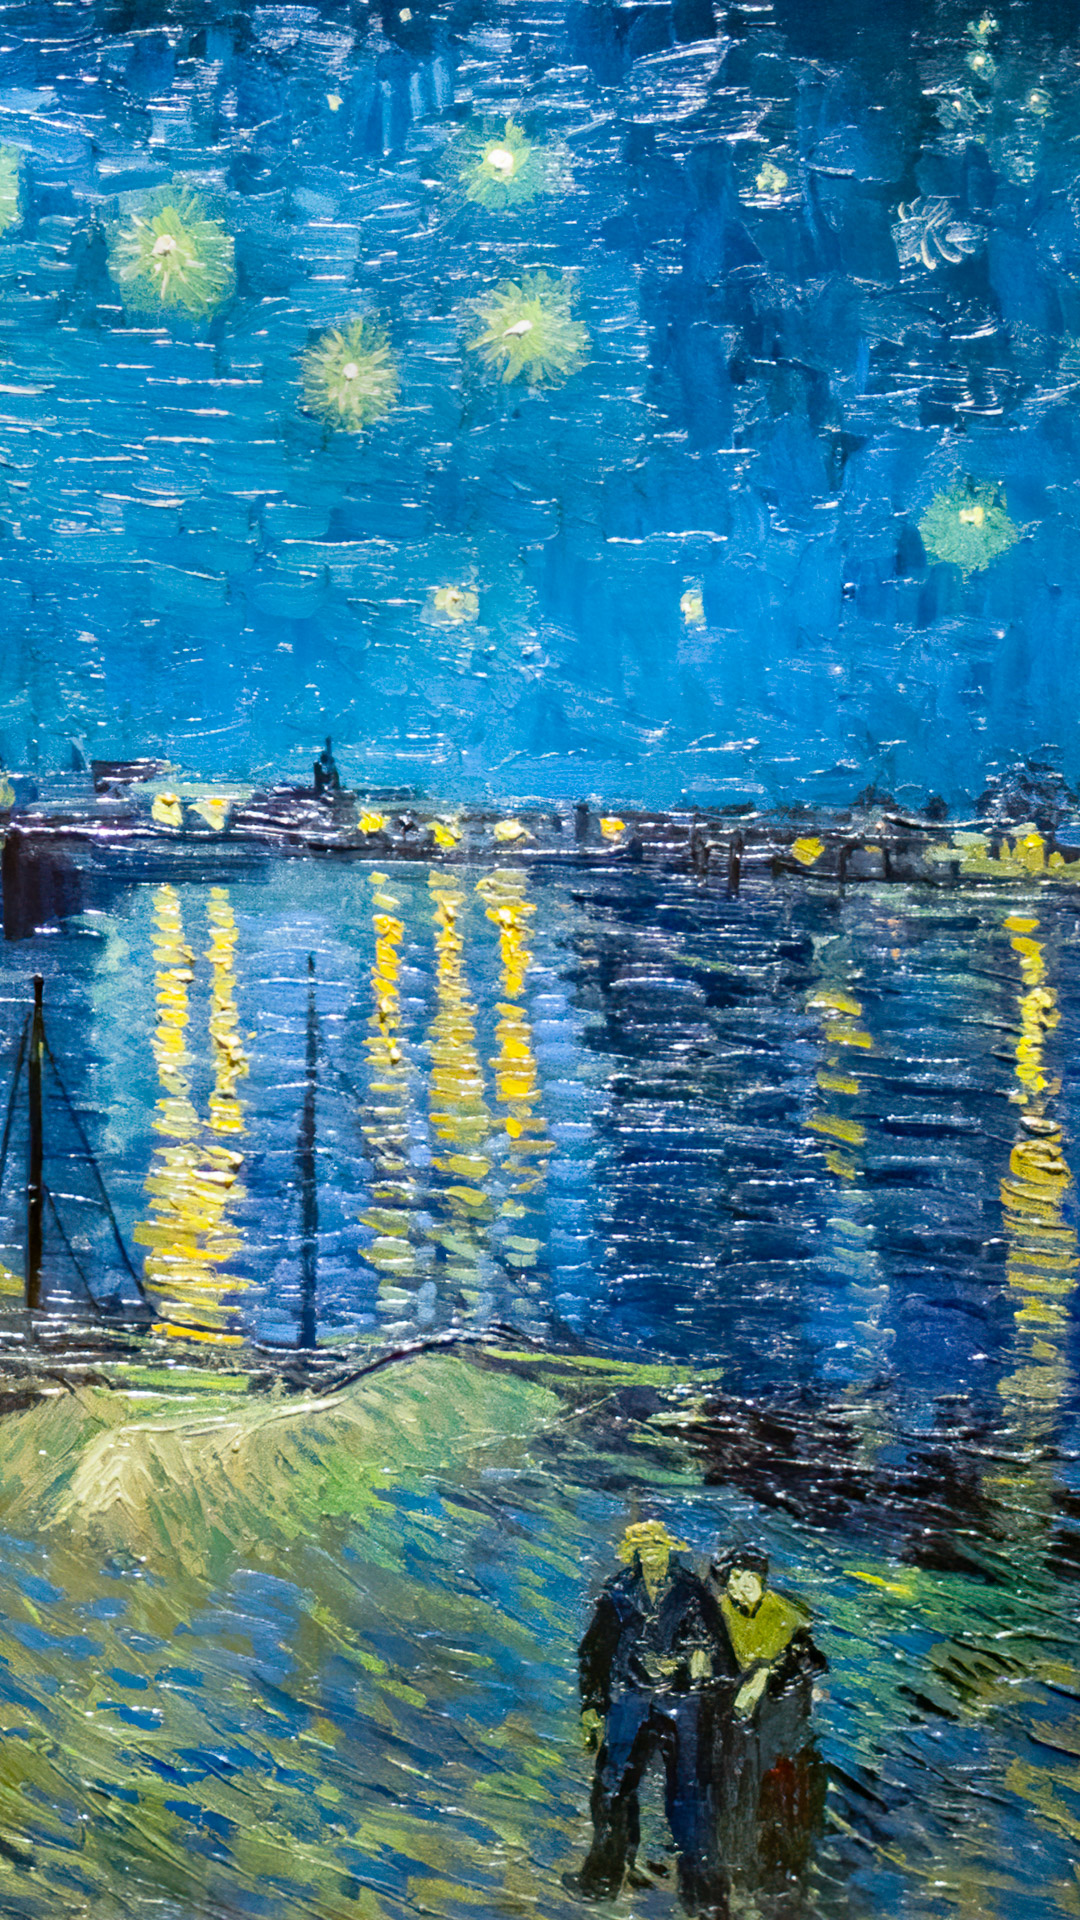 Get mesmerized with the Starry Night Over the Rhône phone wallpaper and feel the magic and mystery of Van Gogh’s nocturnal scene with the lights of the city and the stars reflected on the water.